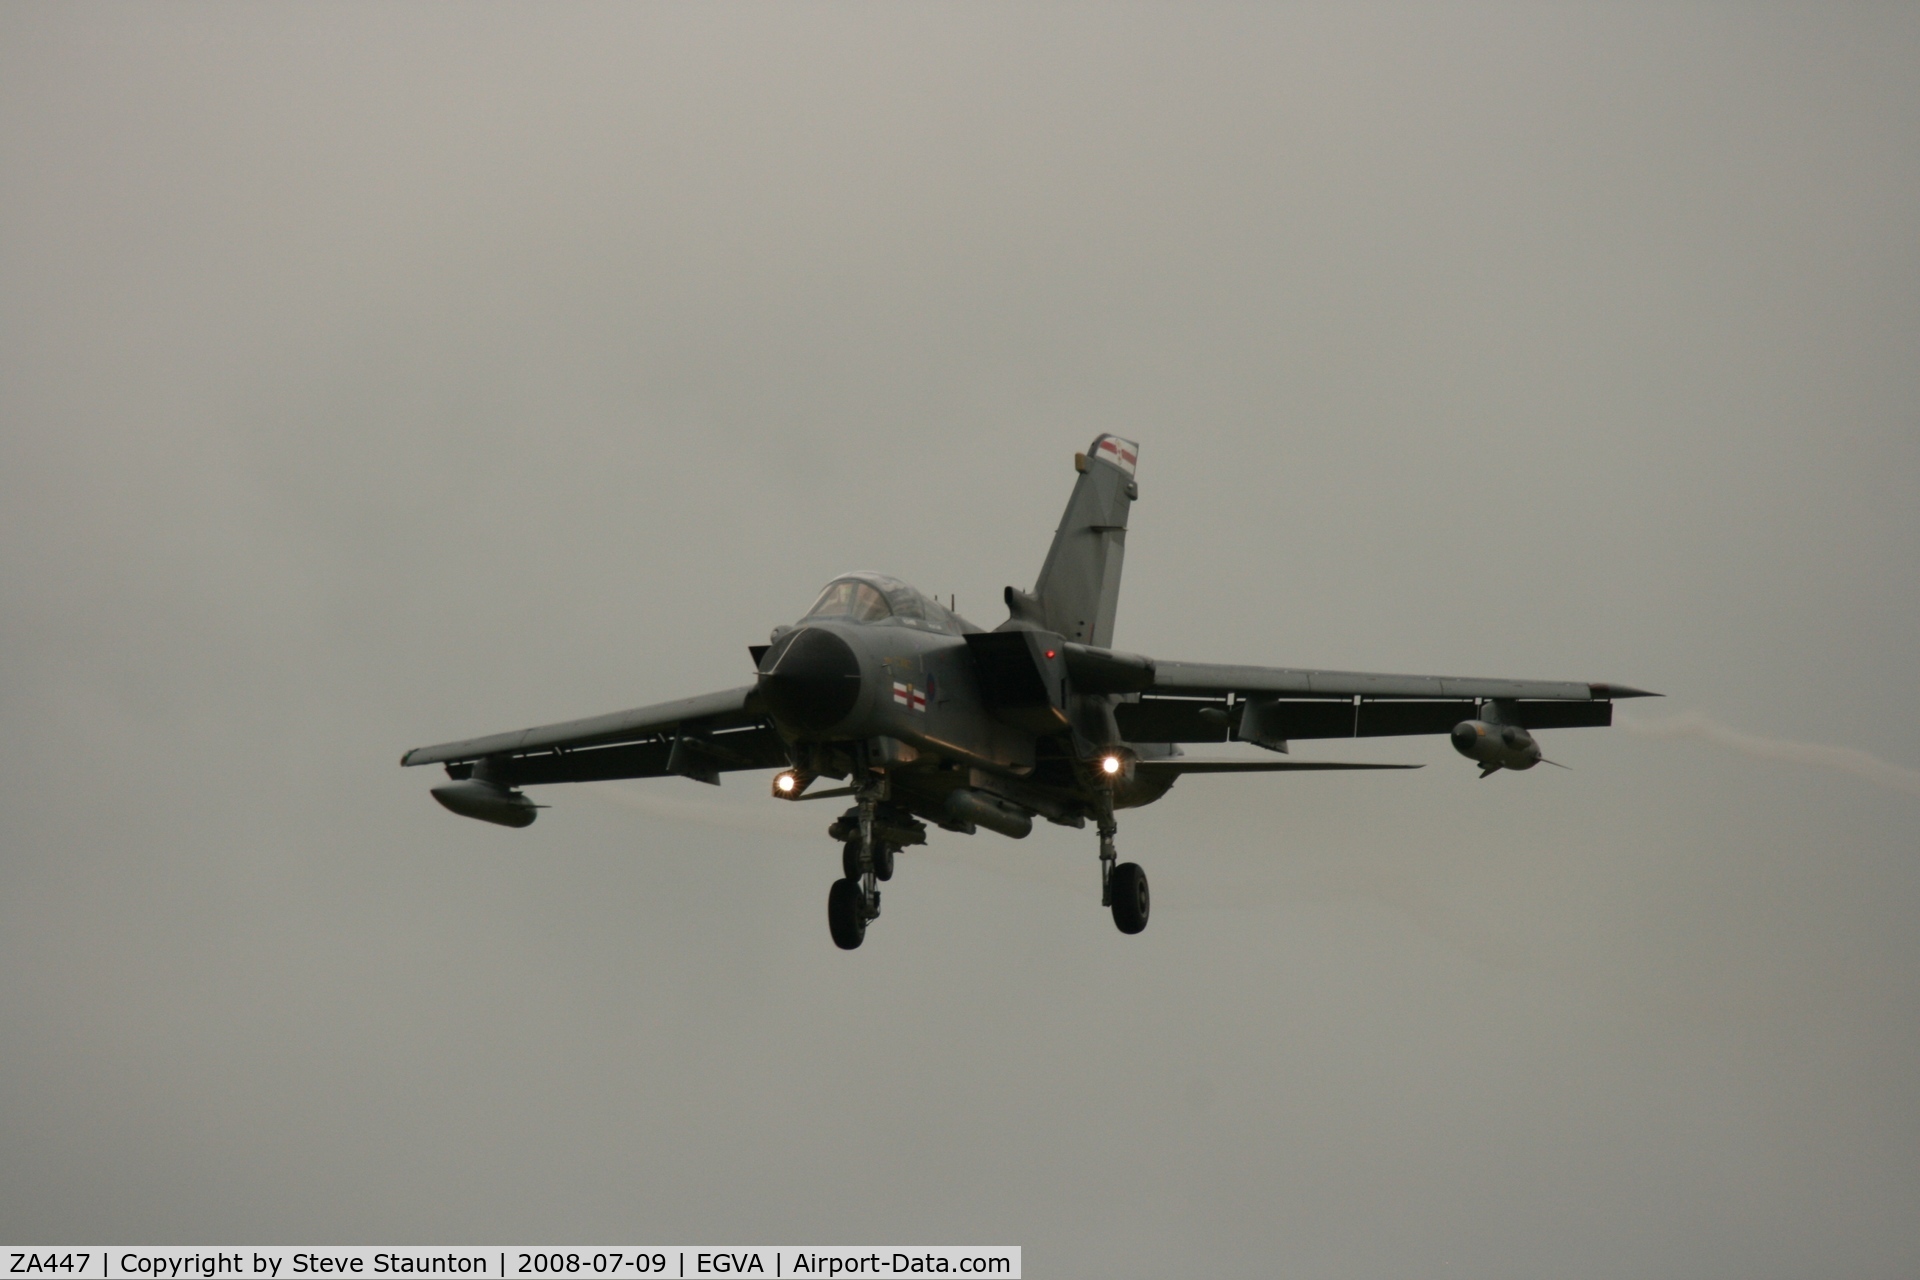 ZA447, 1983 Panavia Tornado GR.4 C/N 235/BS077/3113, Taken at the Royal International Air Tattoo 2008 during arrivals and departures (show days cancelled due to bad weather)